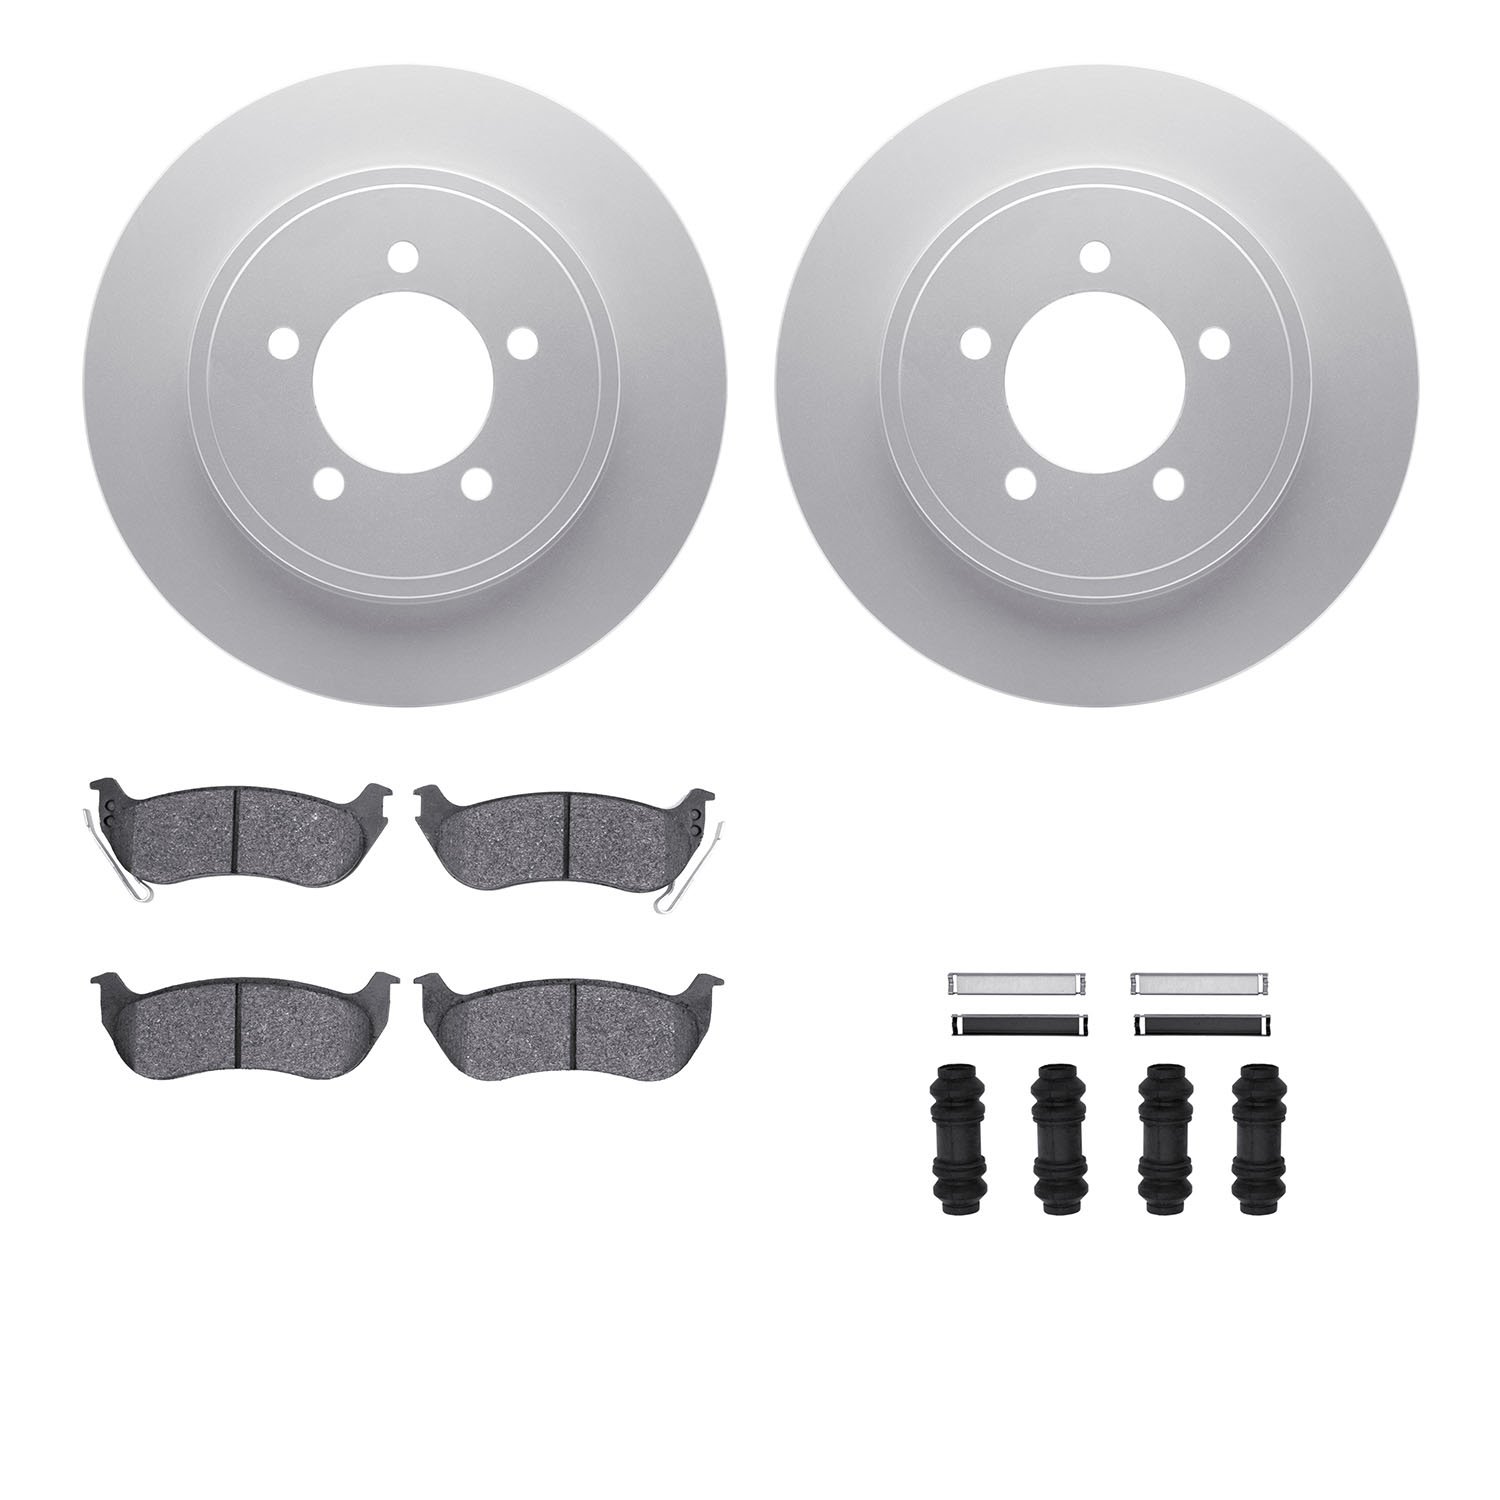 4412-54041 Geospec Brake Rotors with Ultimate-Duty Brake Pads & Hardware, 2006-2010 Ford/Lincoln/Mercury/Mazda, Position: Rear